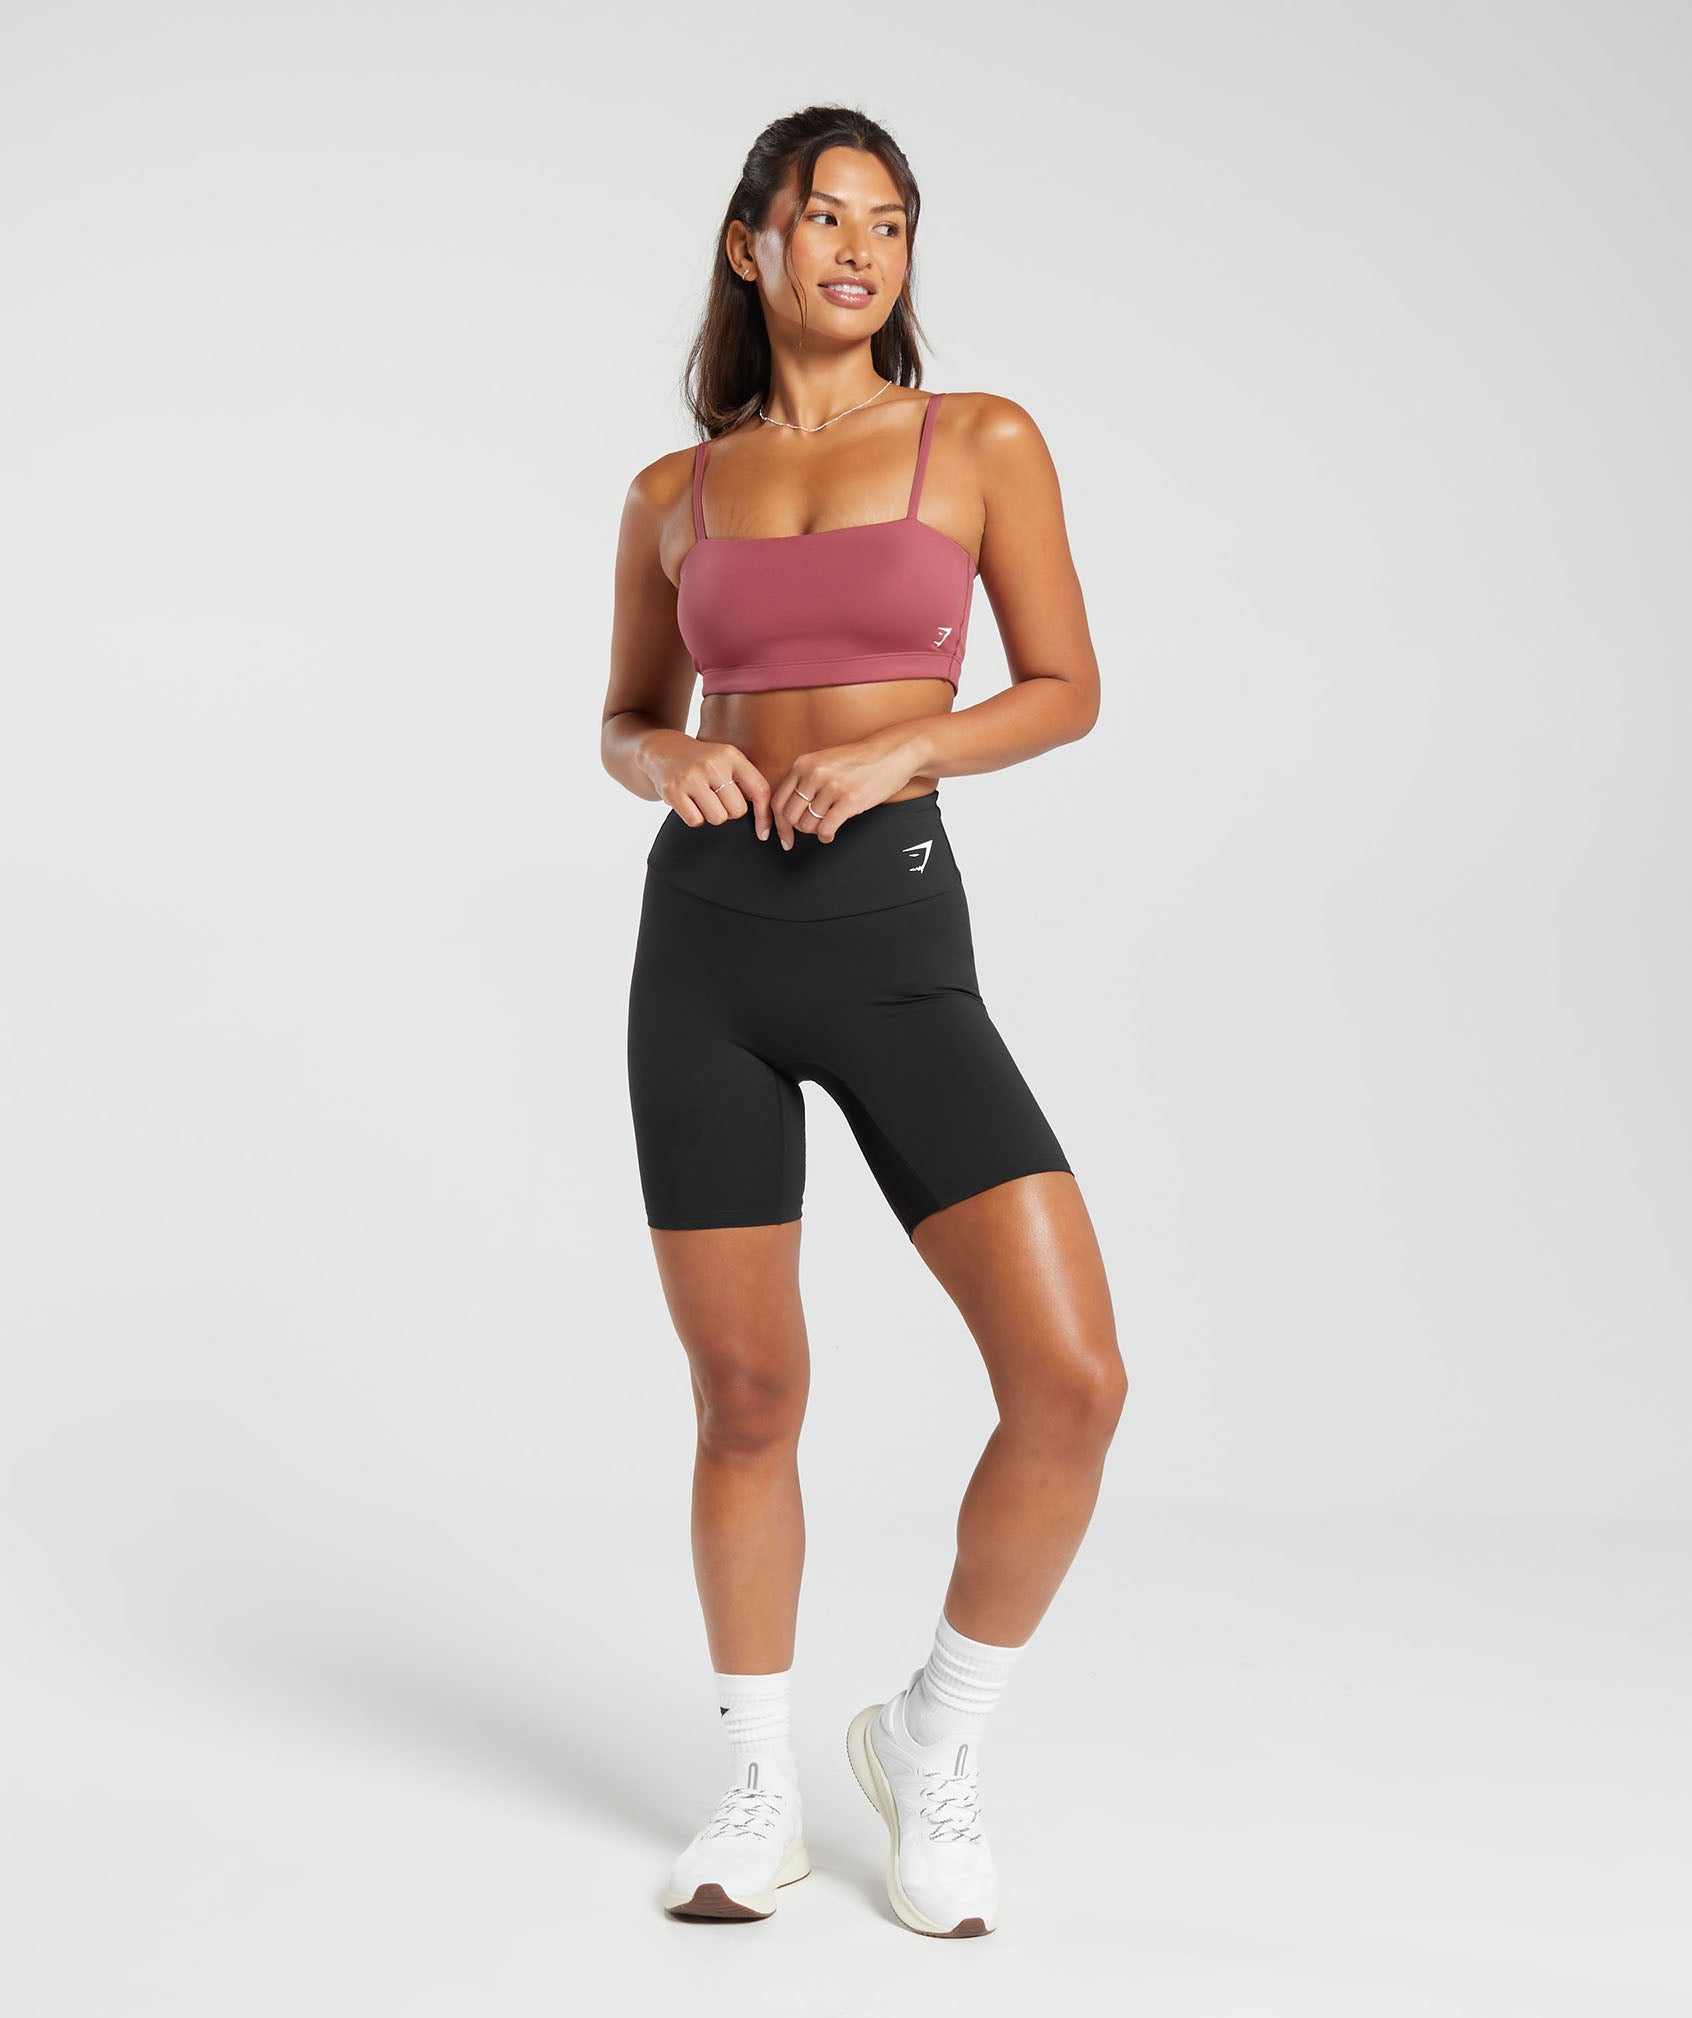 Bandeau Sports Bra in Soft Berry - view 4